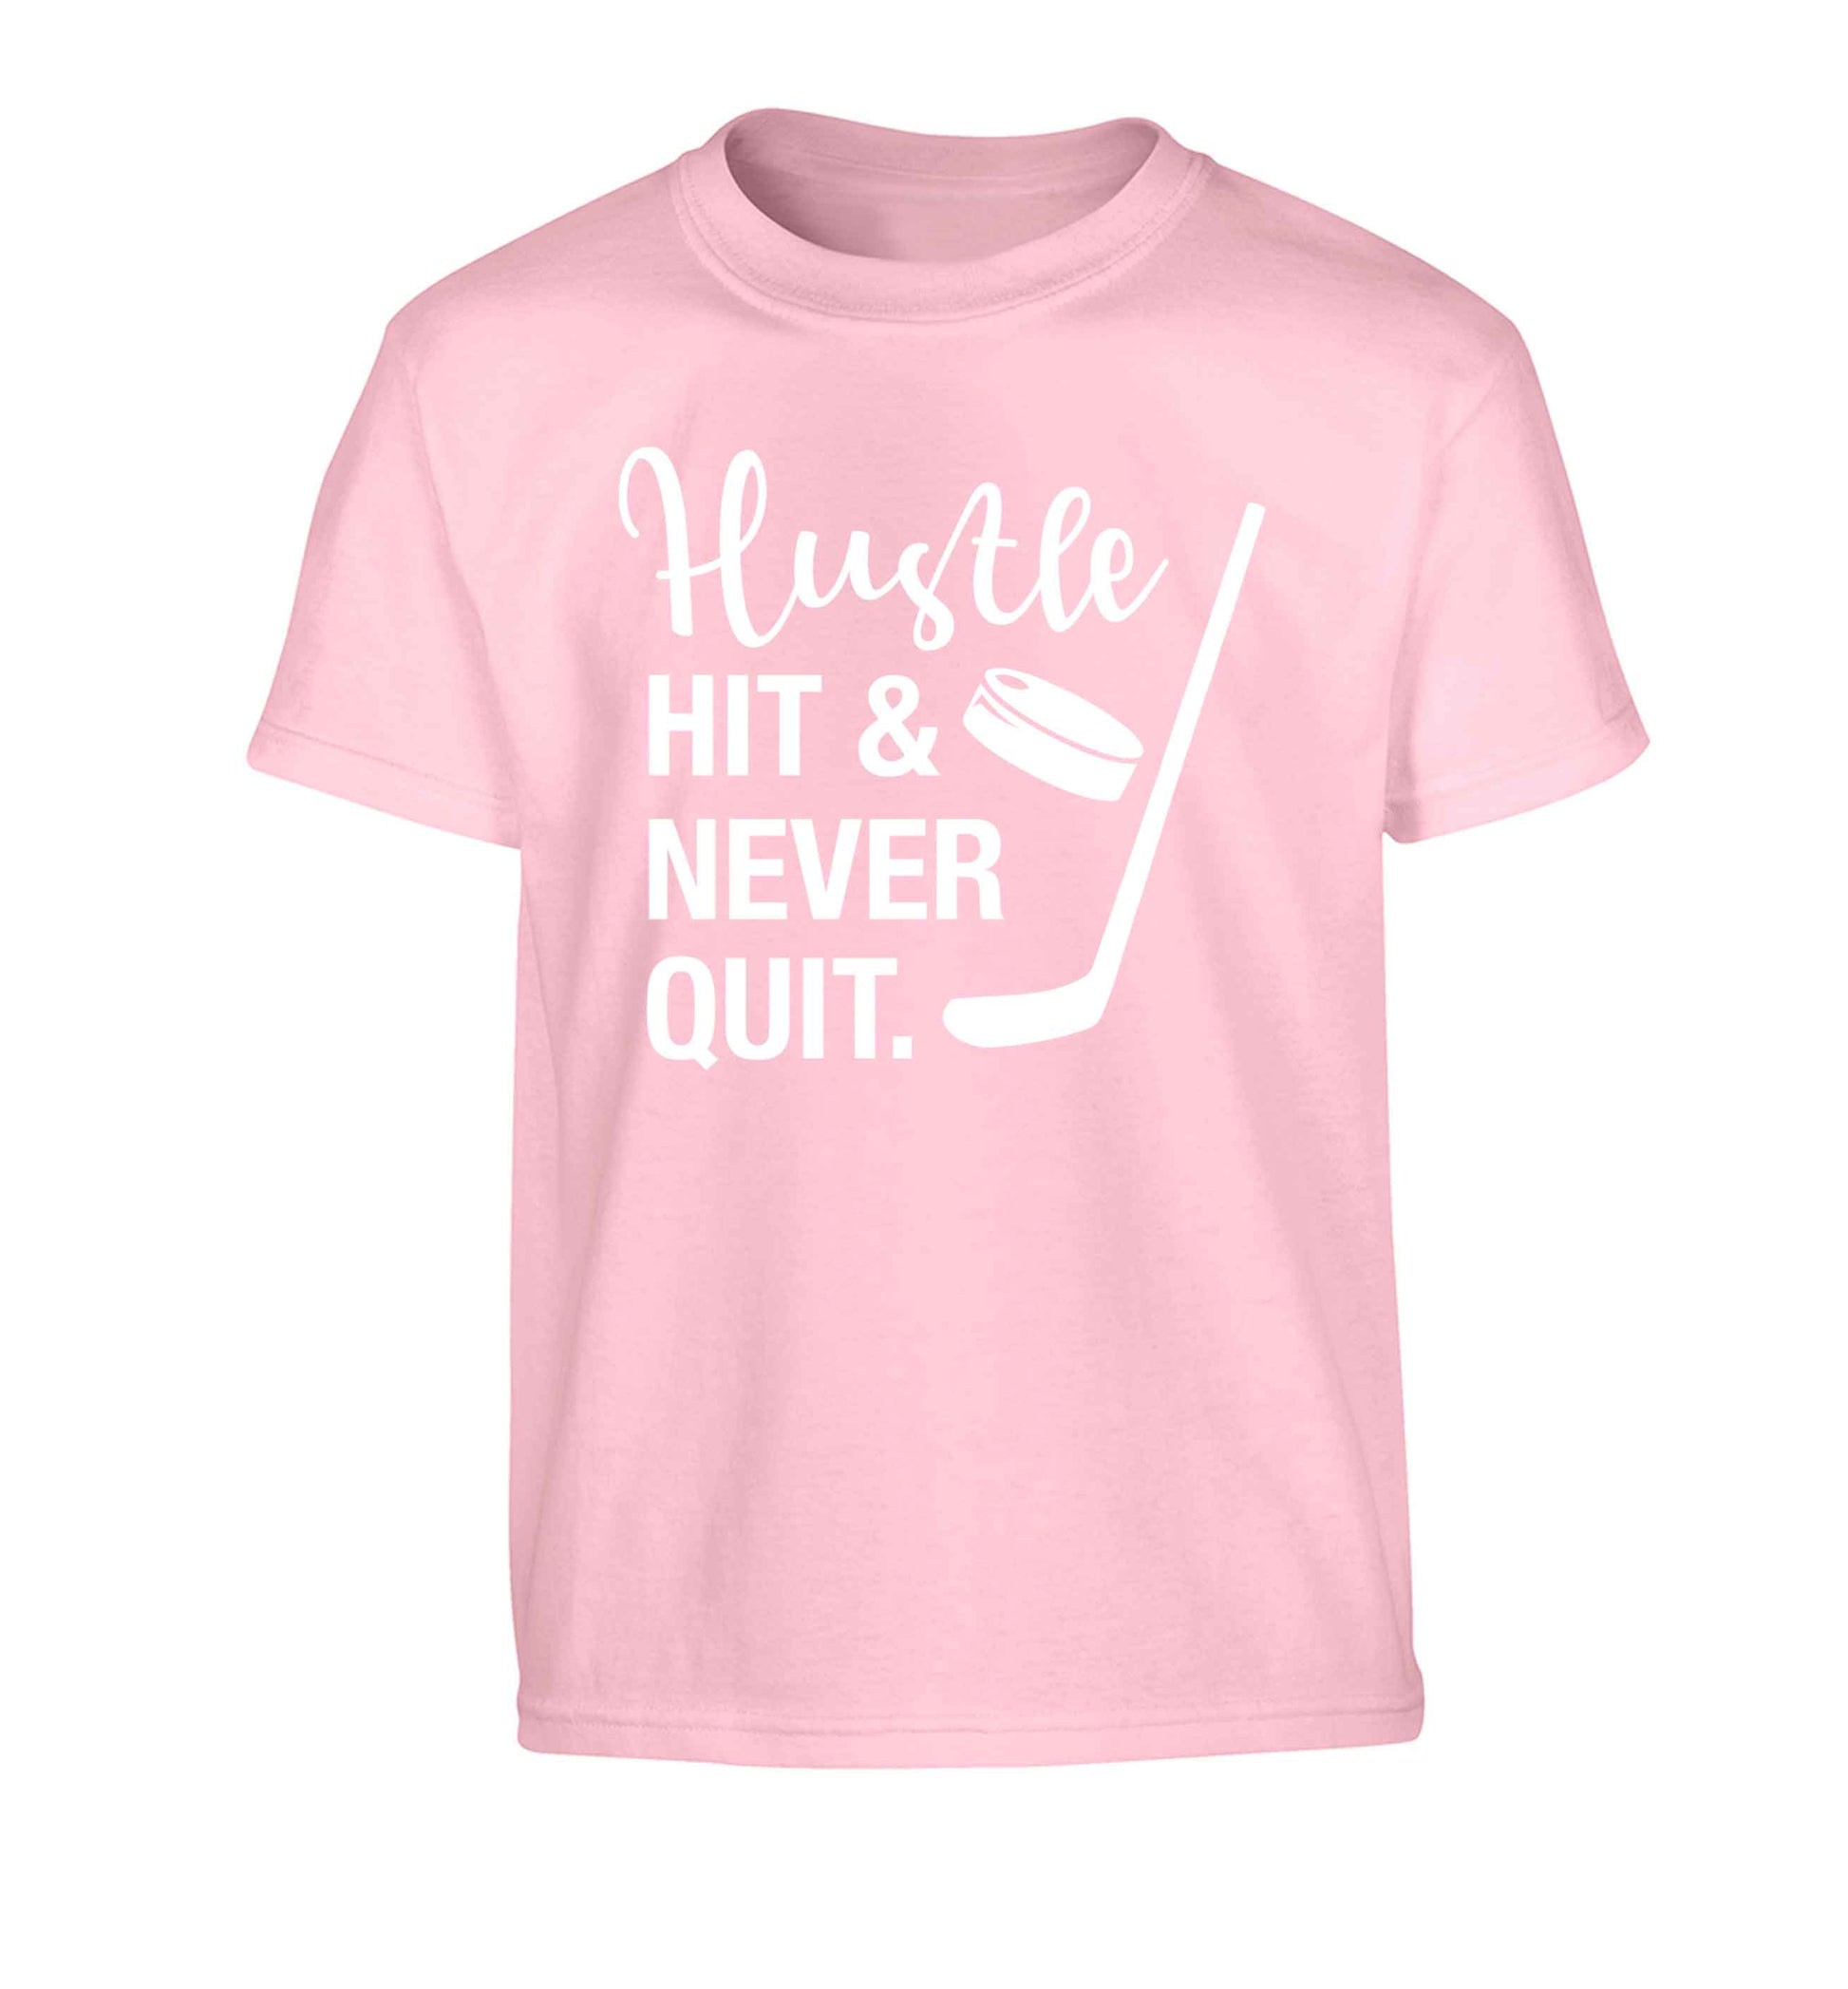 Hustle hit and never quit Children's light pink Tshirt 12-13 Years